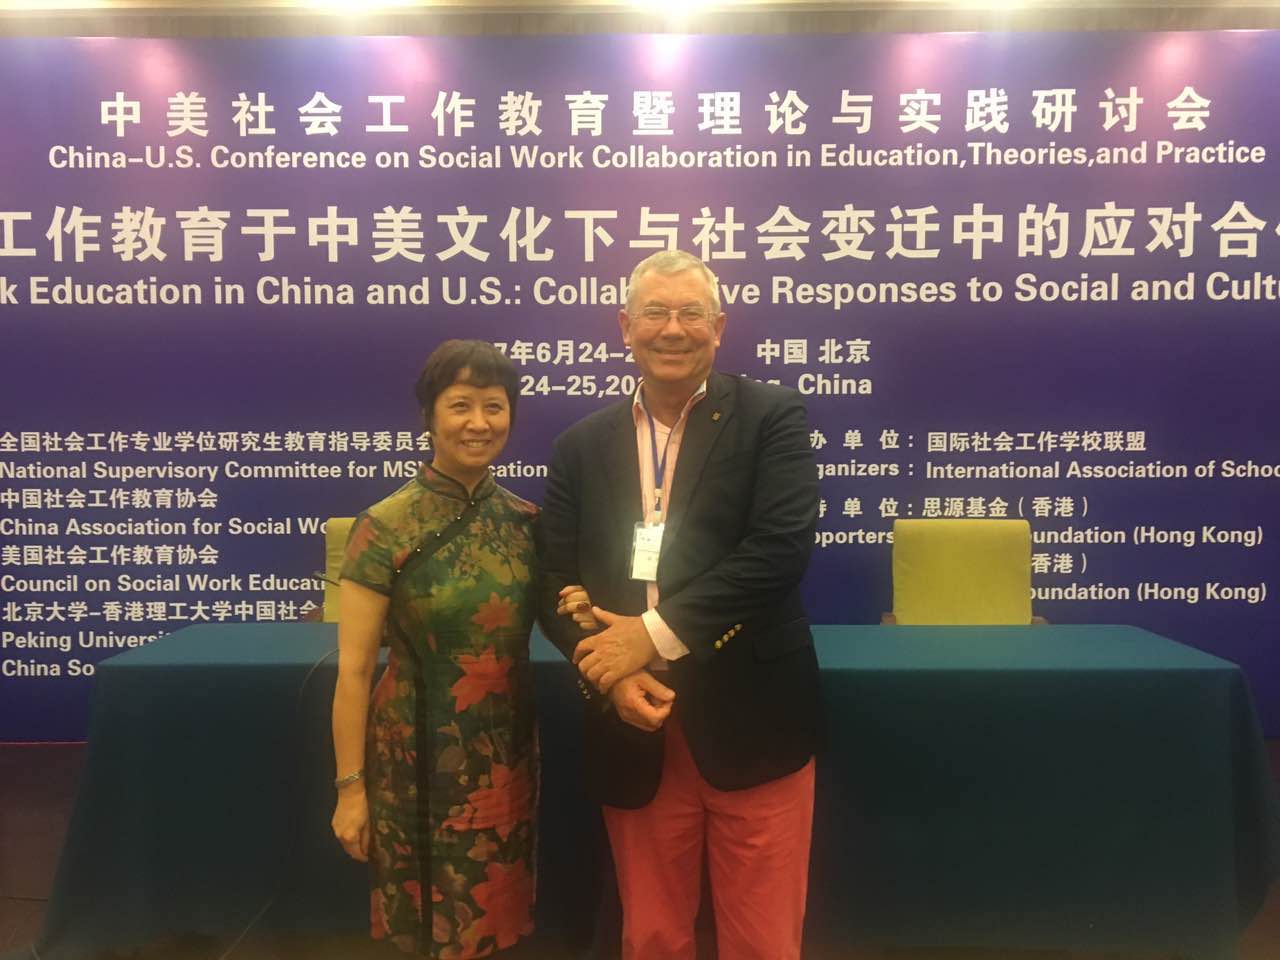 Dr. Fenghzi Ma, Tianjin University with Dr. Bruce Thyer